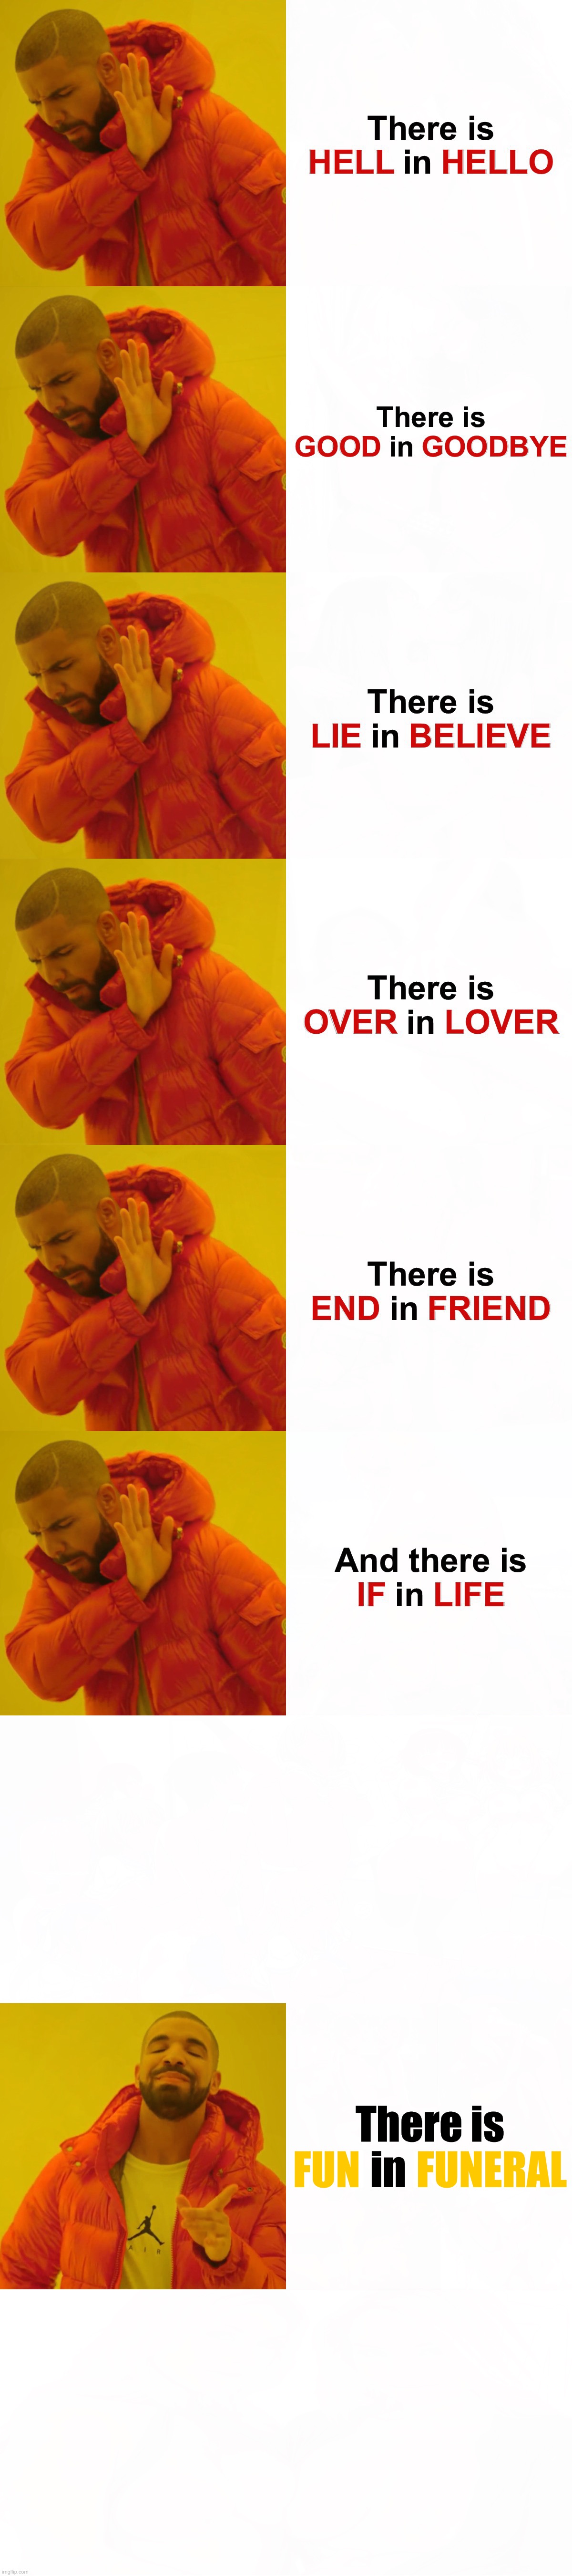  There is HELL in HELLO; There is GOOD in GOODBYE; There is LIE in BELIEVE; There is OVER in LOVER; There is END in FRIEND; And there is IF in LIFE; There is FUN in FUNERAL; FUN       FUNERAL; FUN      FUNERAL | image tagged in memes,drake hotline bling,light at the end of tunnel,funny memes,words,fun | made w/ Imgflip meme maker